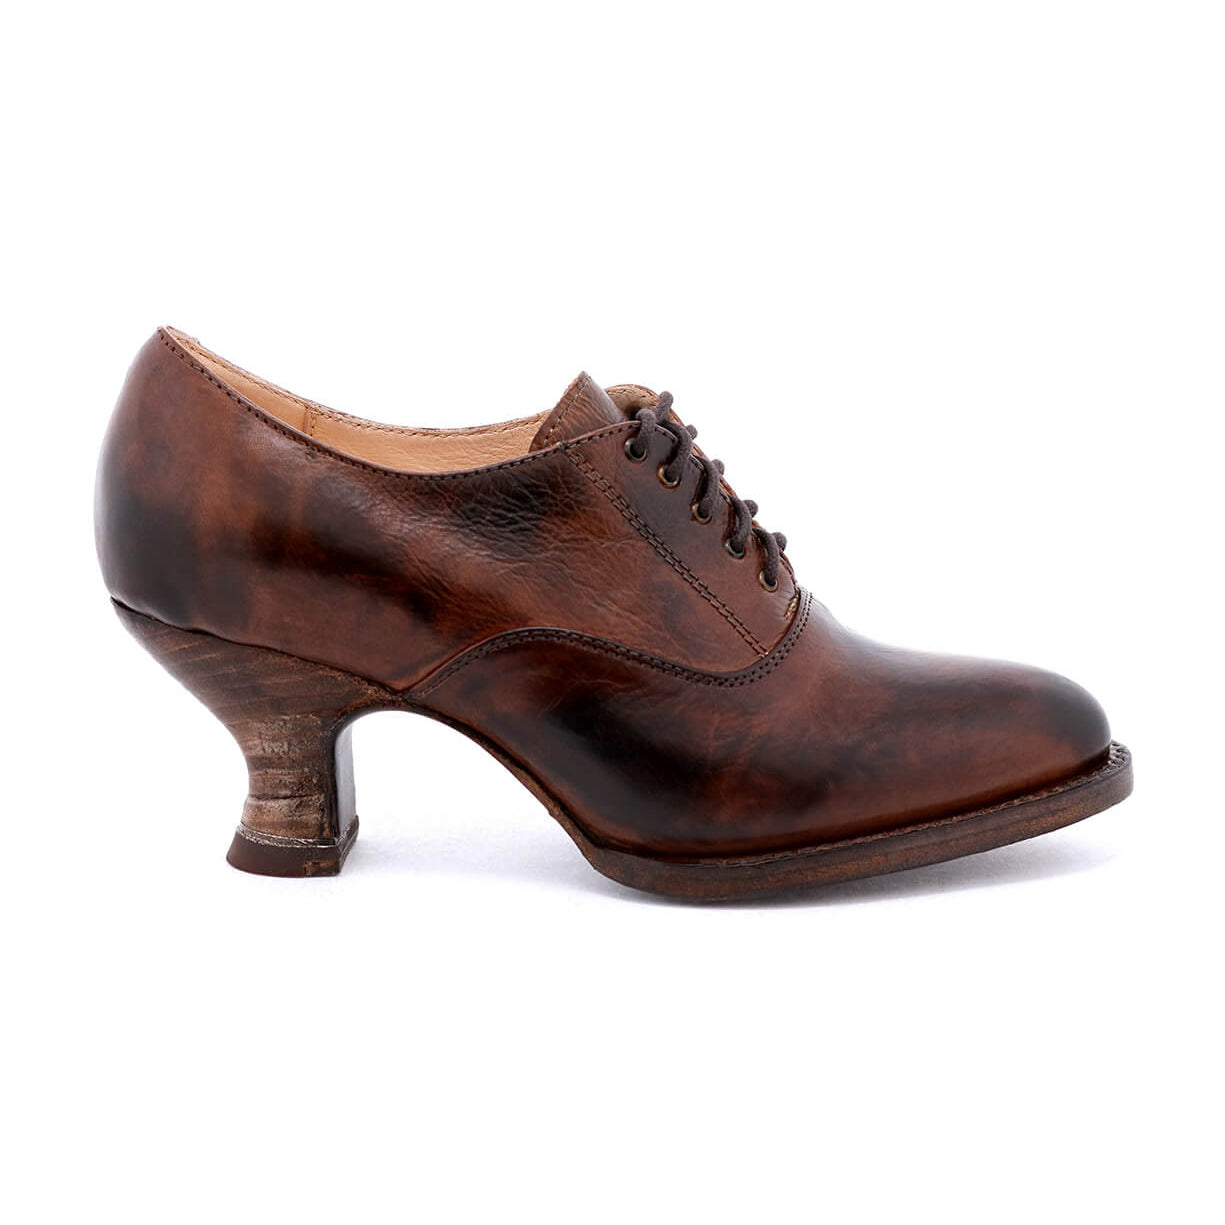 A women's brown oxford shoe with a lace-up front, showcasing a neutral look on a white background - the Oak Tree Farms Janet women's brown oxford shoe, with a lace-up front, showcases a neutral look on a white background.